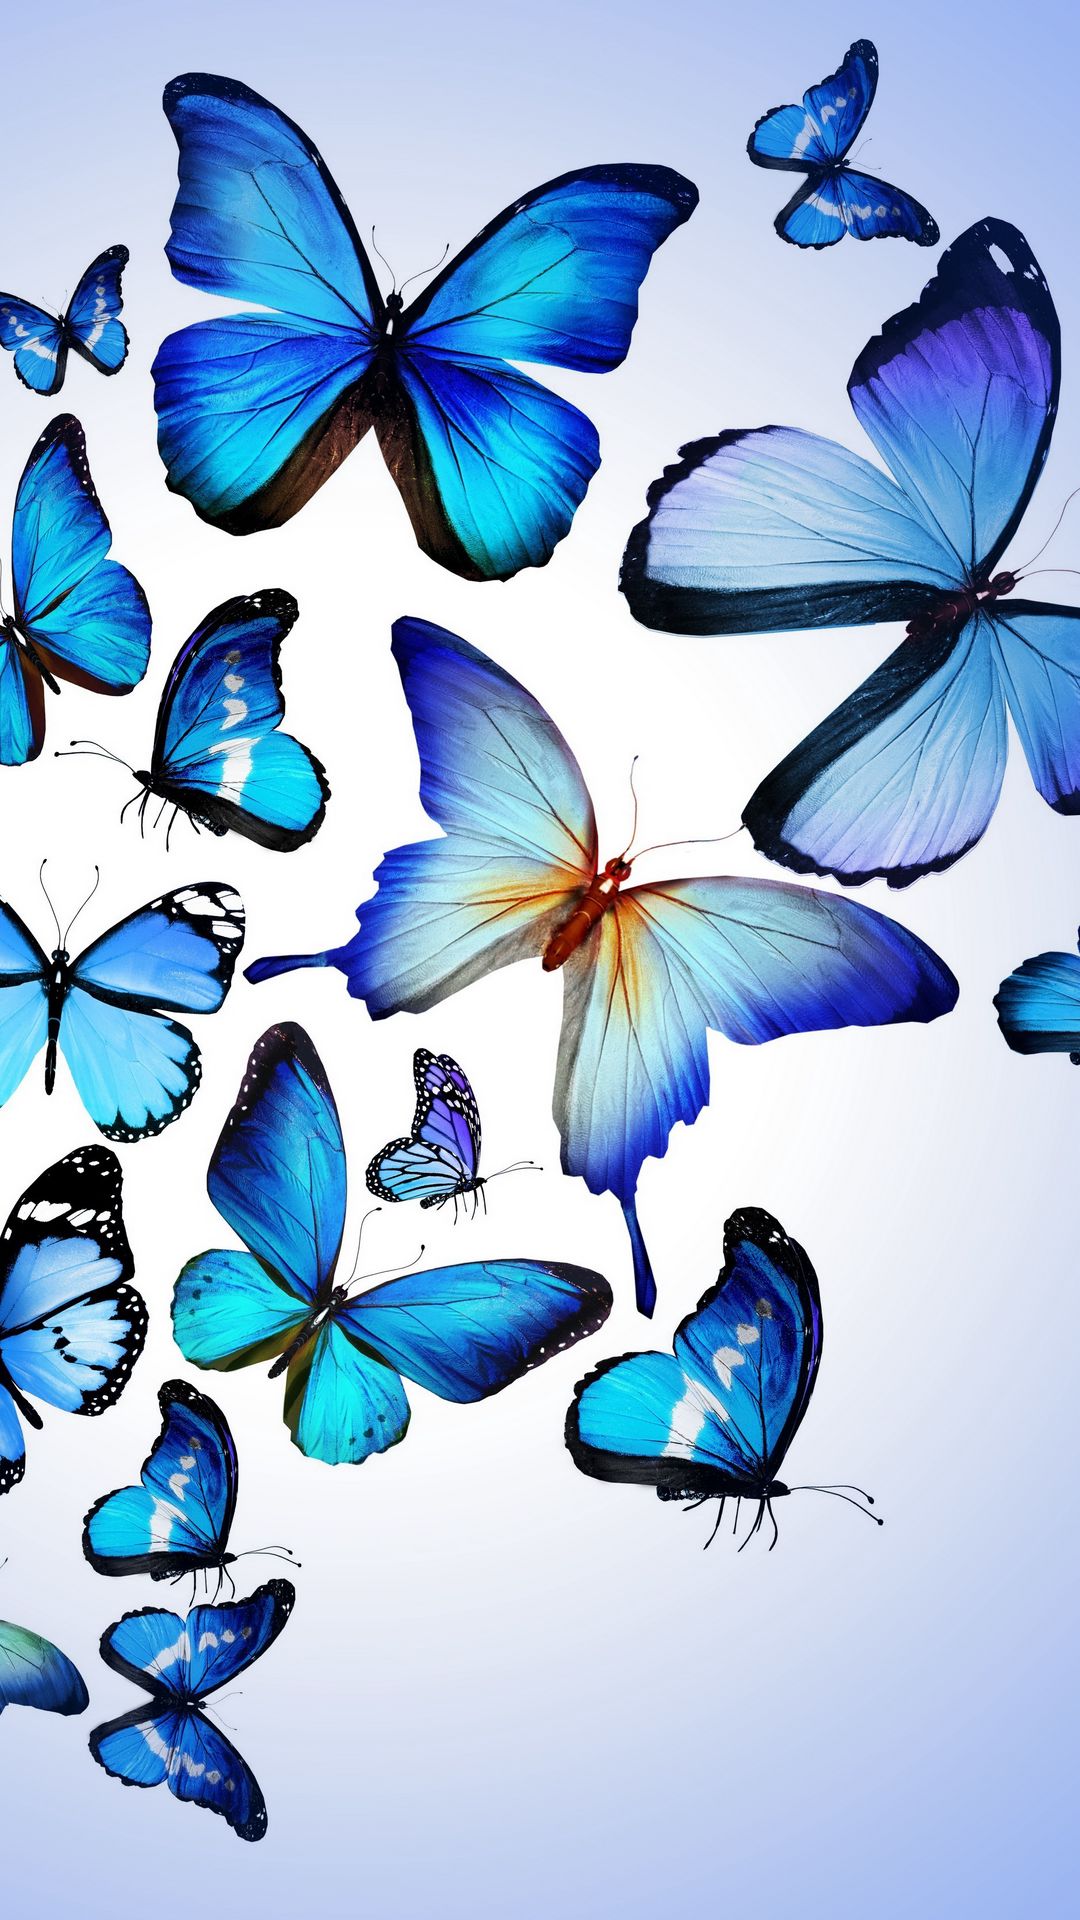 Download wallpaper 1080x1920 butterfly, colorful, blue, drawing, art,  beautiful samsung galaxy s4, s5, note, sony xperia z, z1, z2, z3, htc one,  lenovo vibe hd background